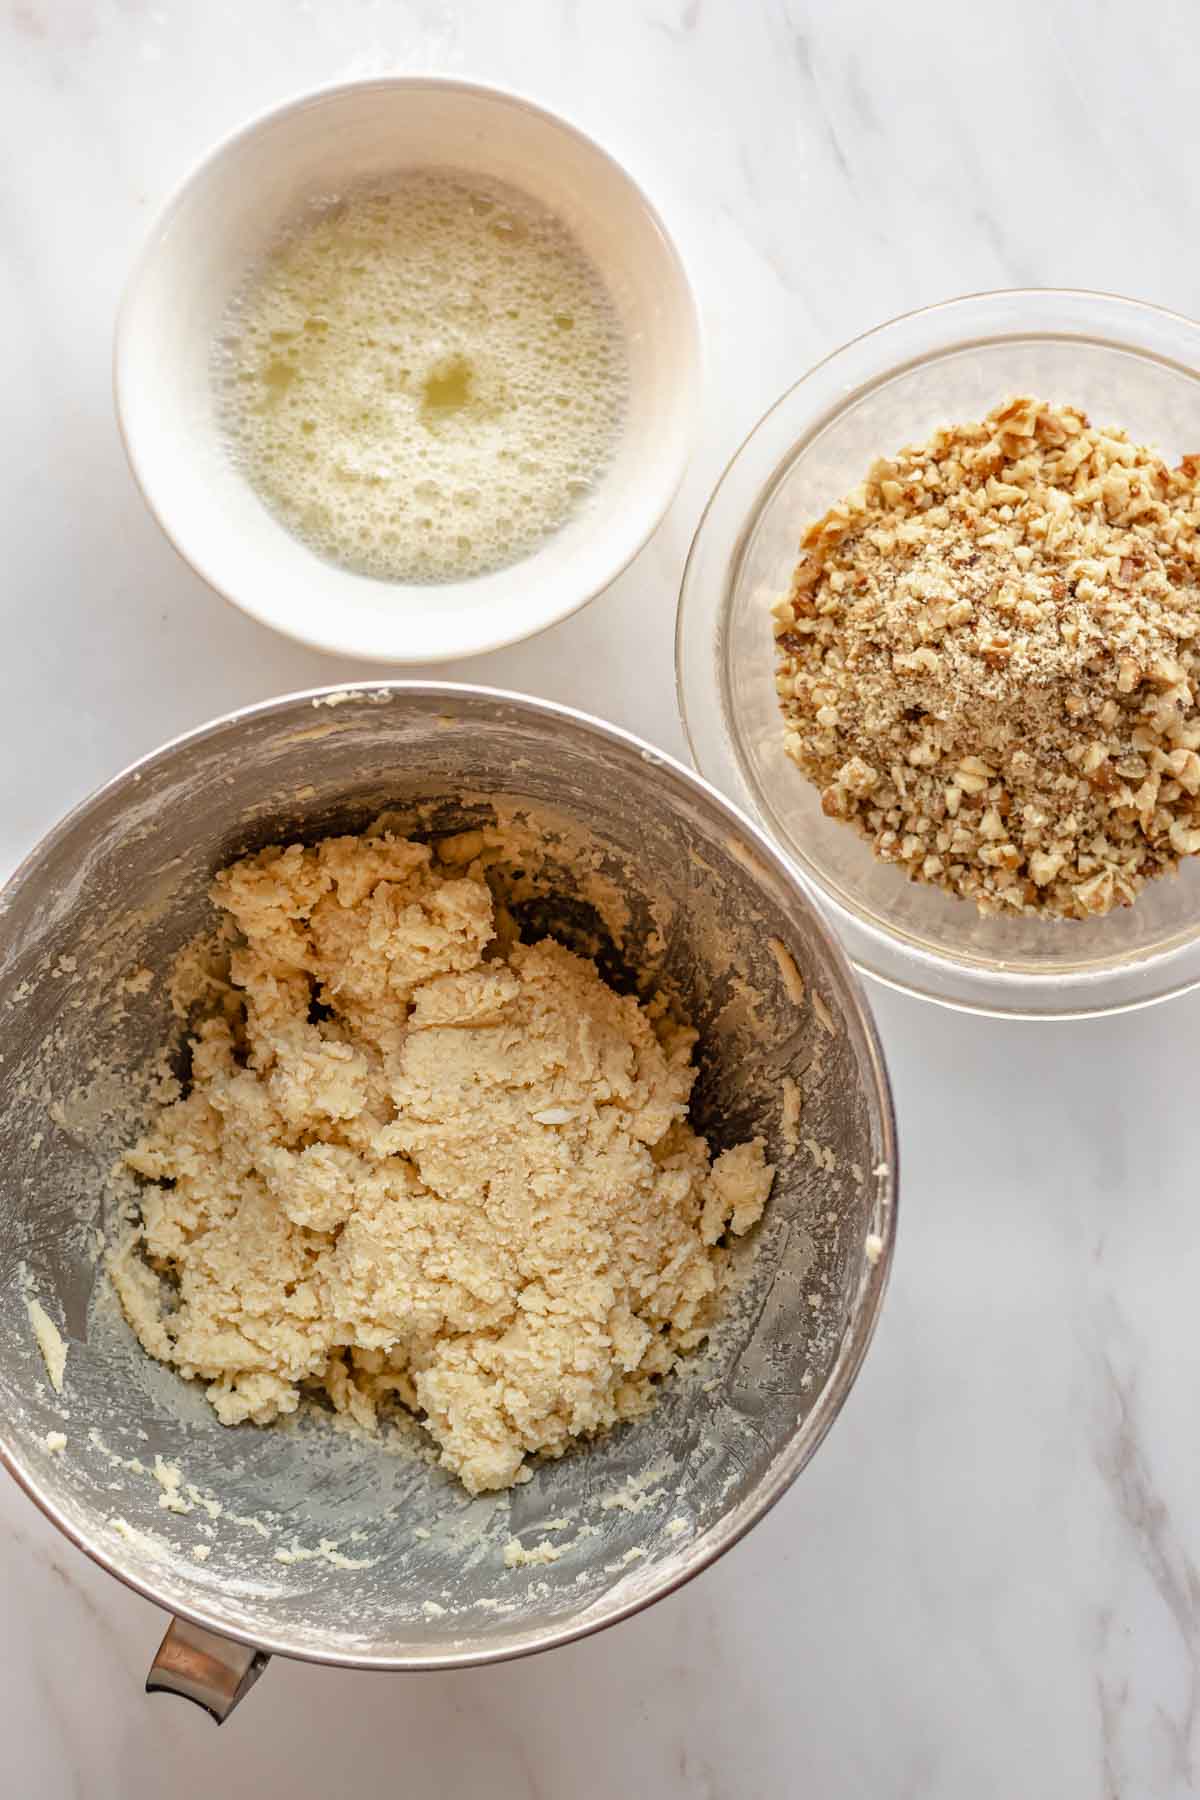 Dough, chopped walnuts, and egg whites in separate bowls.